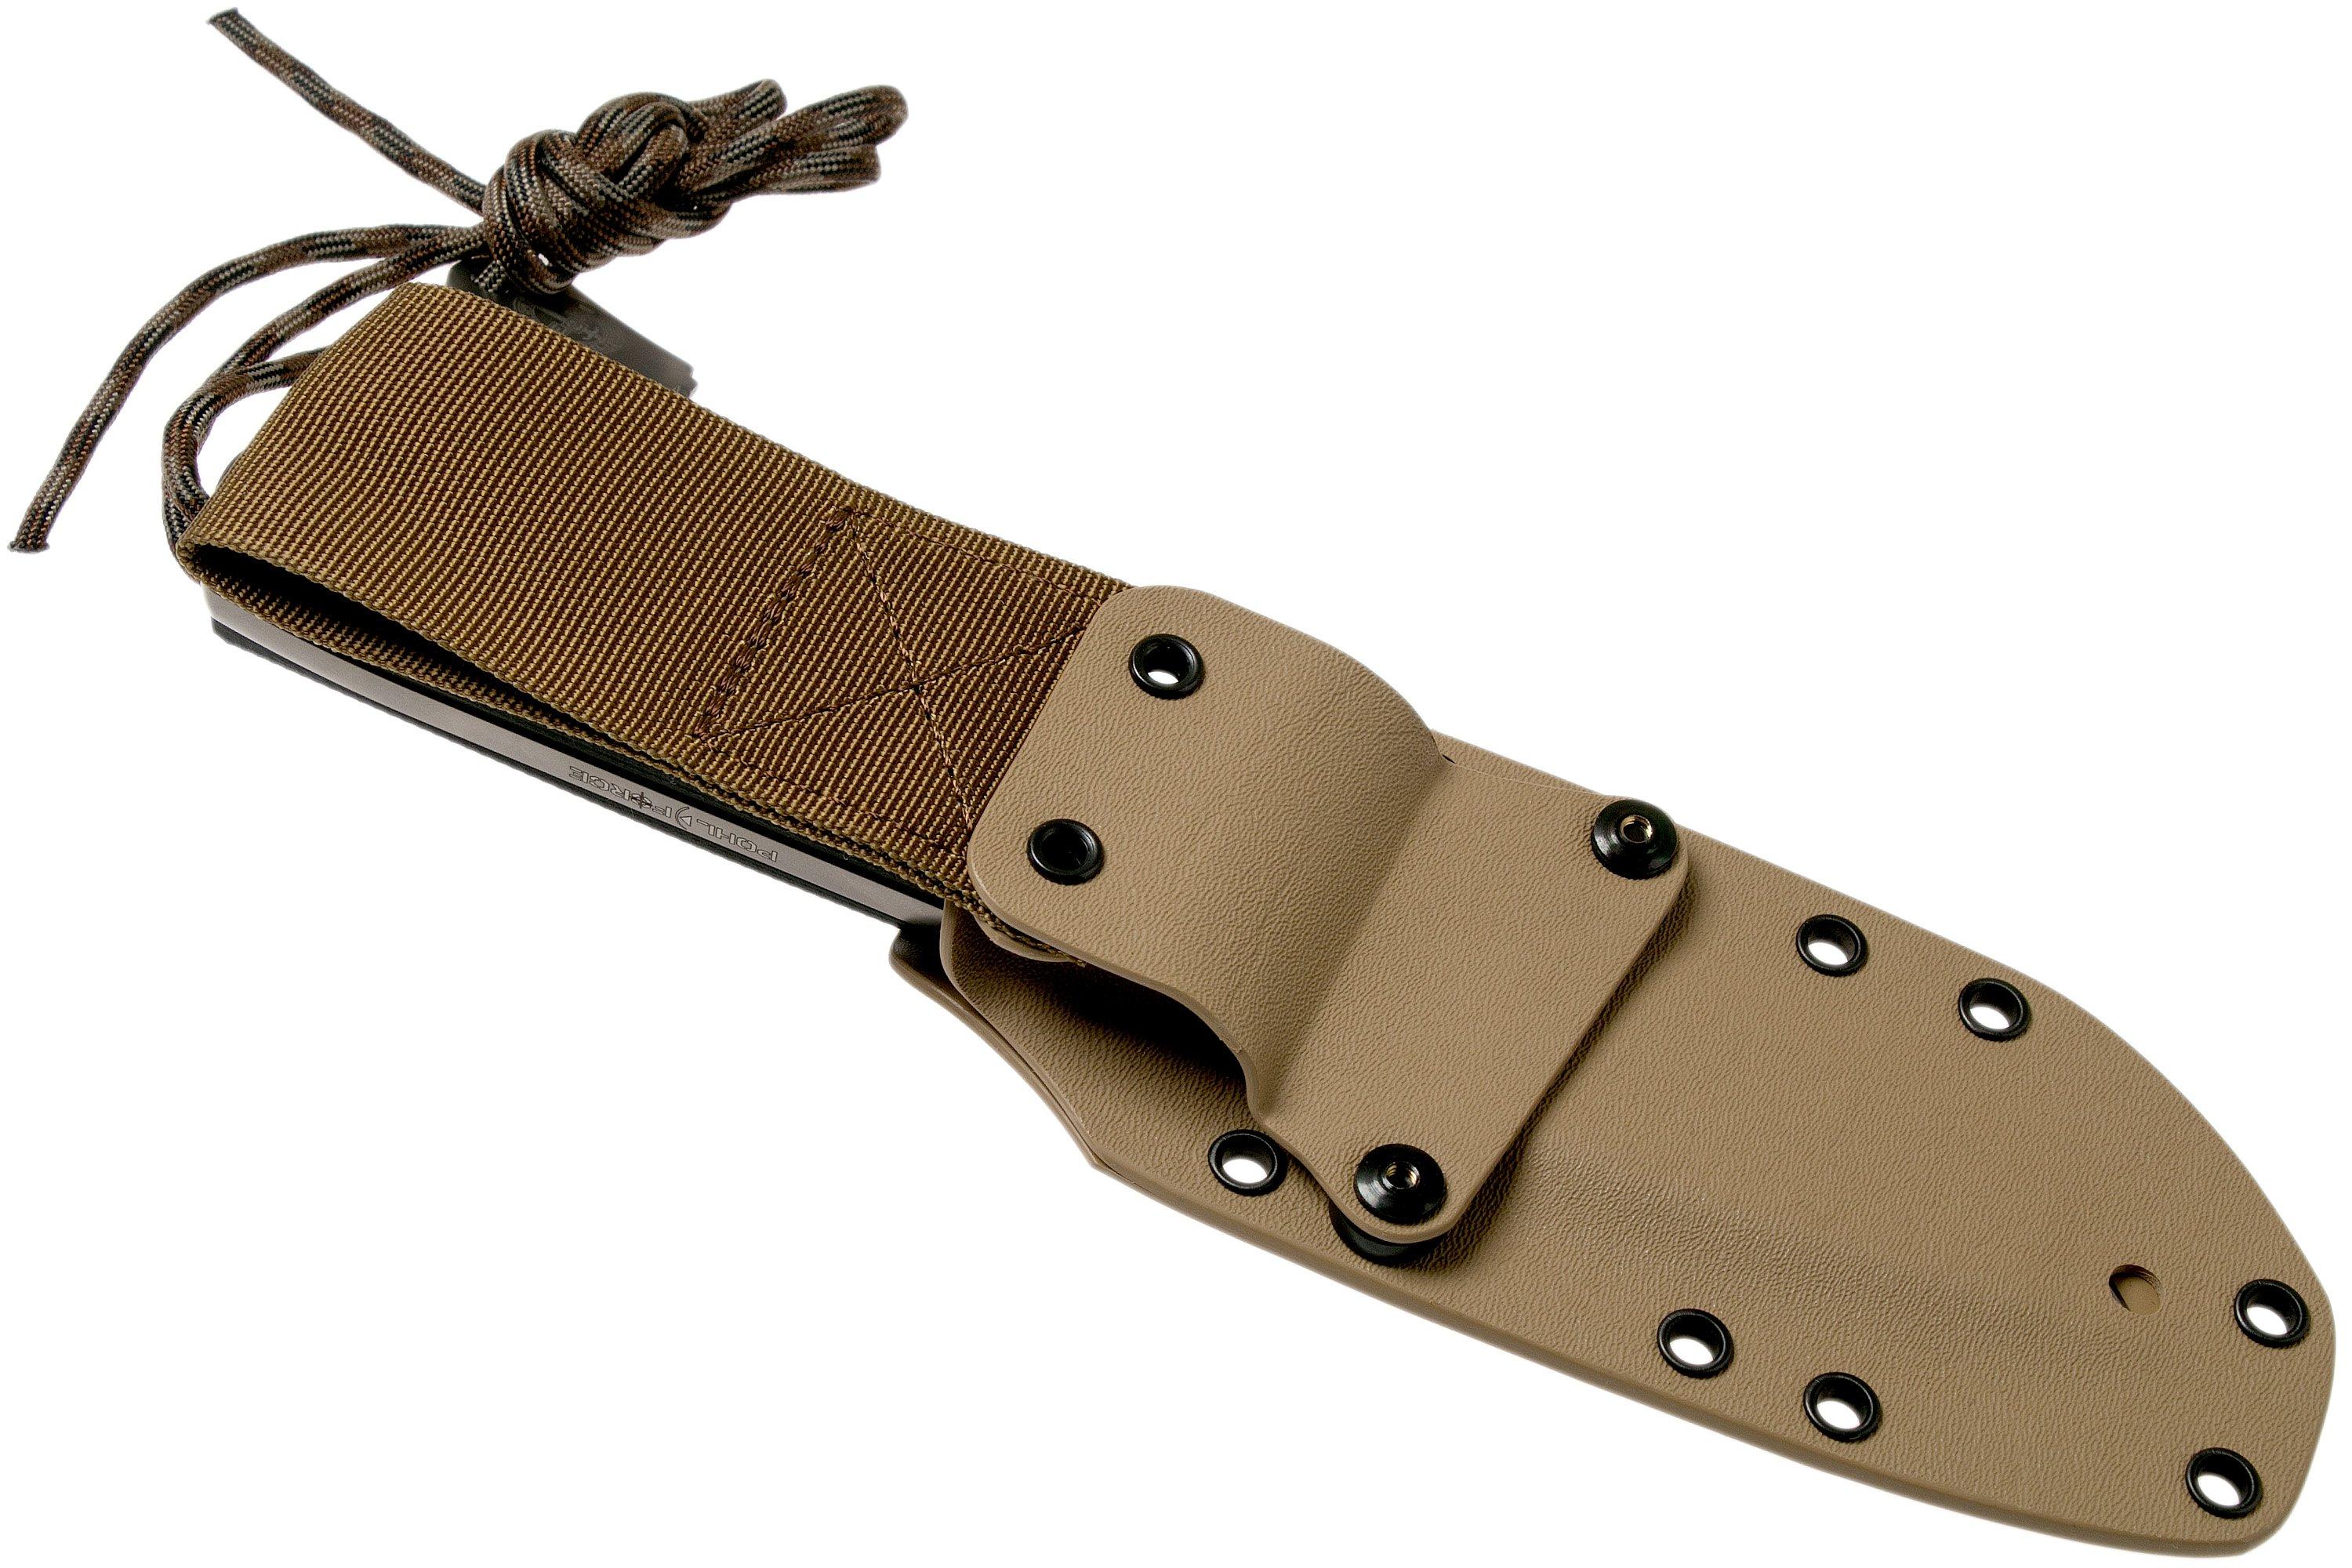 pohl-force-mk3-combat-medic-2068-limited-edition-outdoor-knife